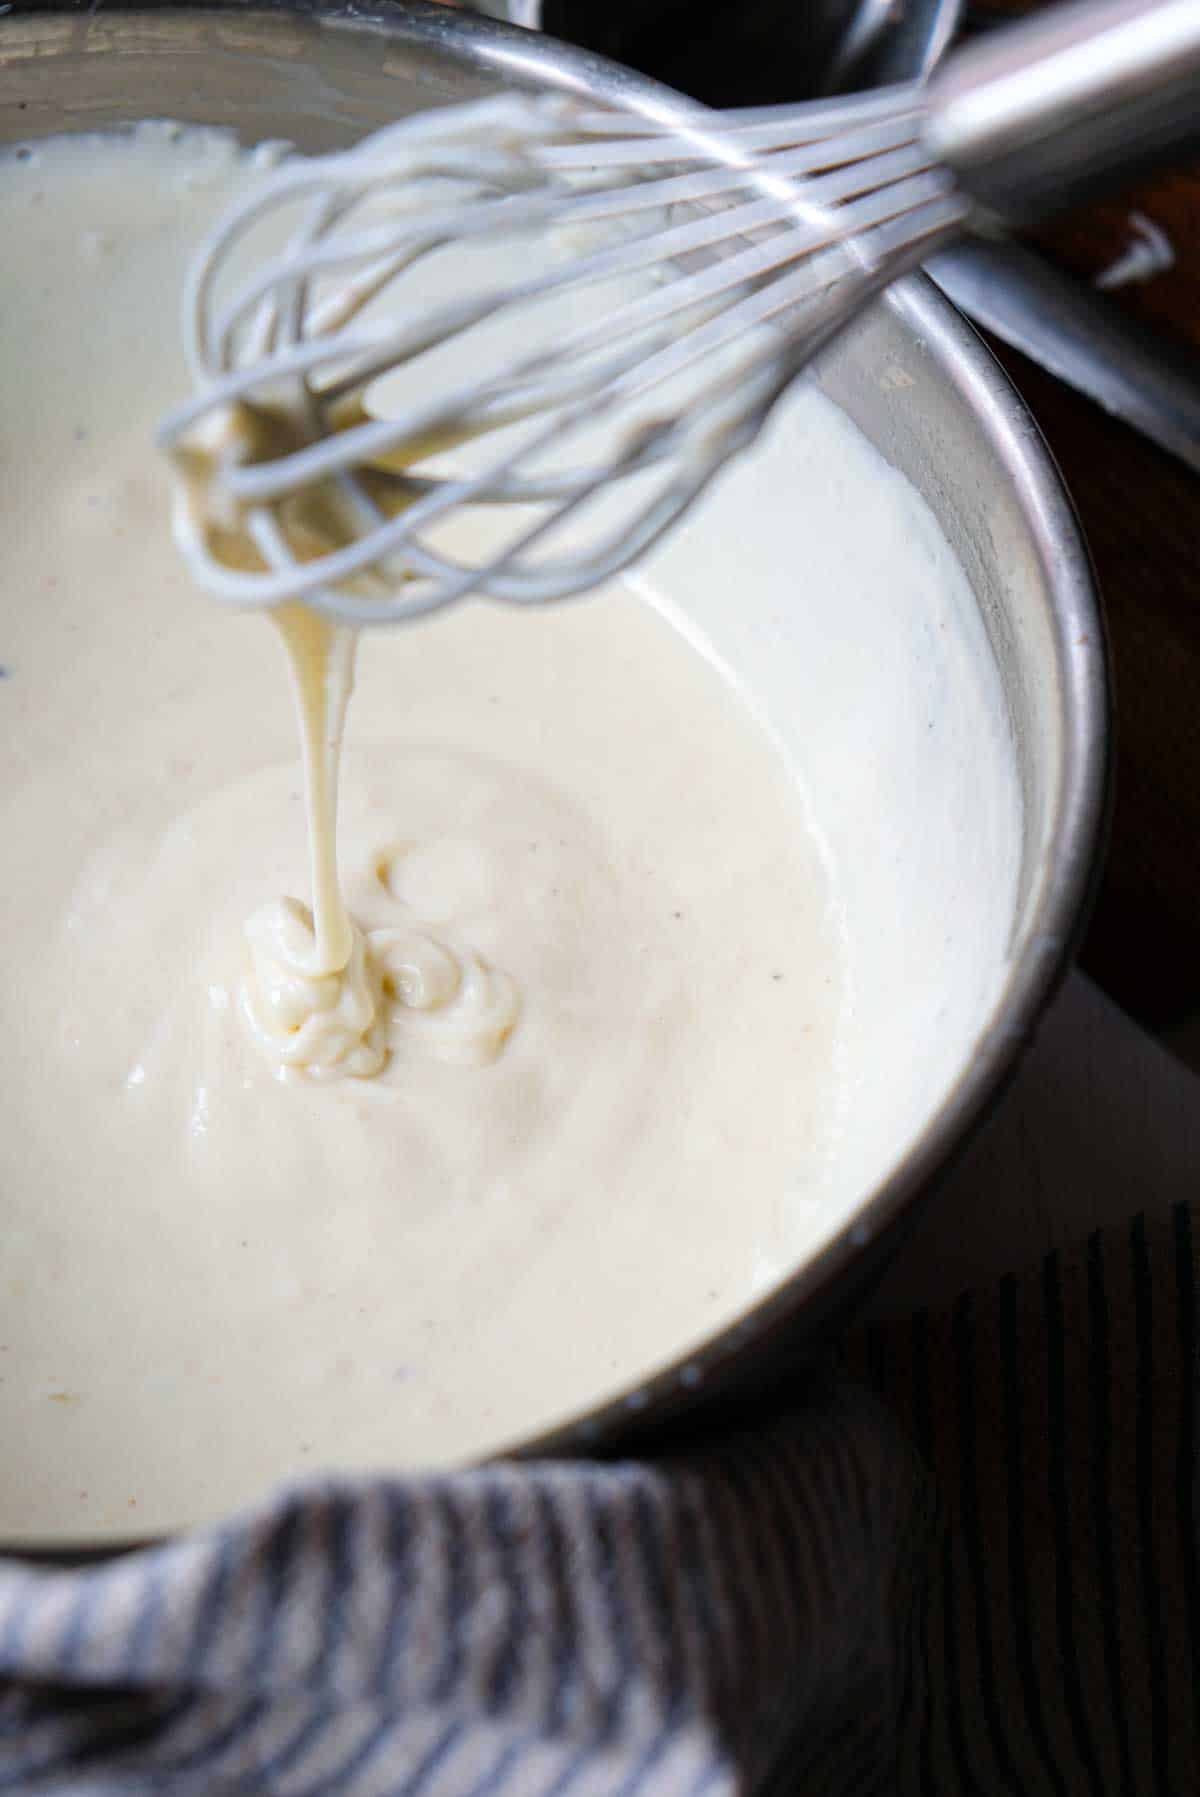 Bechamel sauce dripping from a wire whisk into a stainless steel pot.